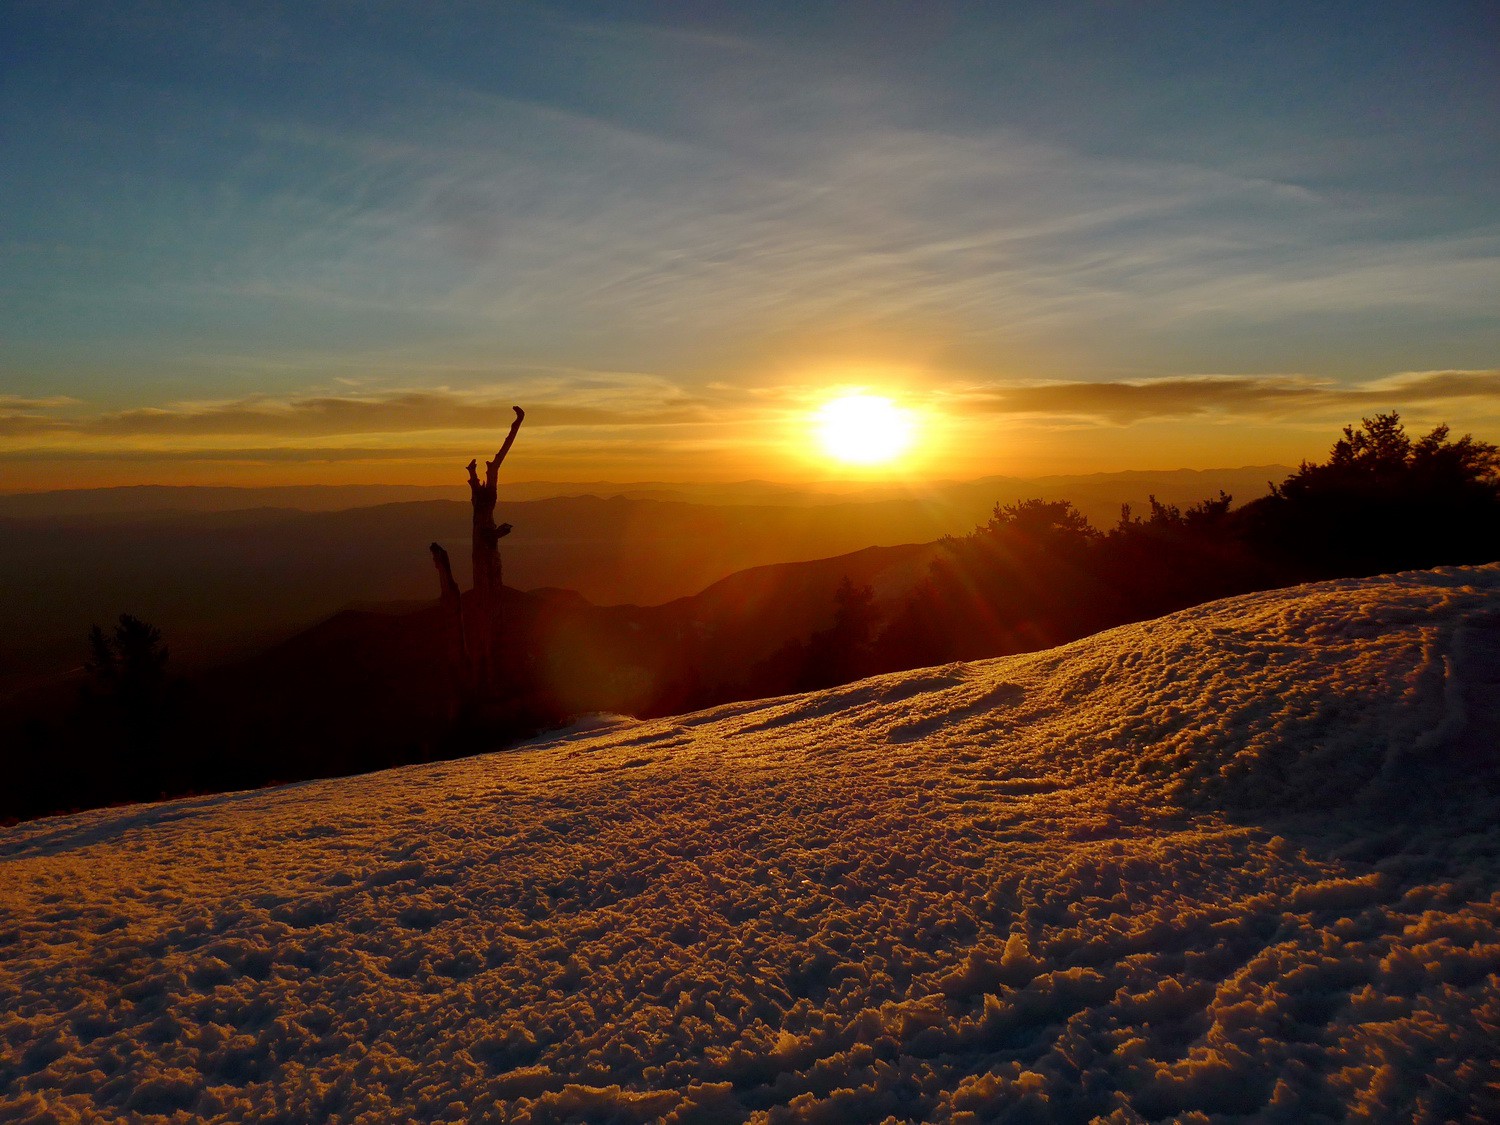 Sunset seen from the saddle between Mount Charleston and Griffith Peak